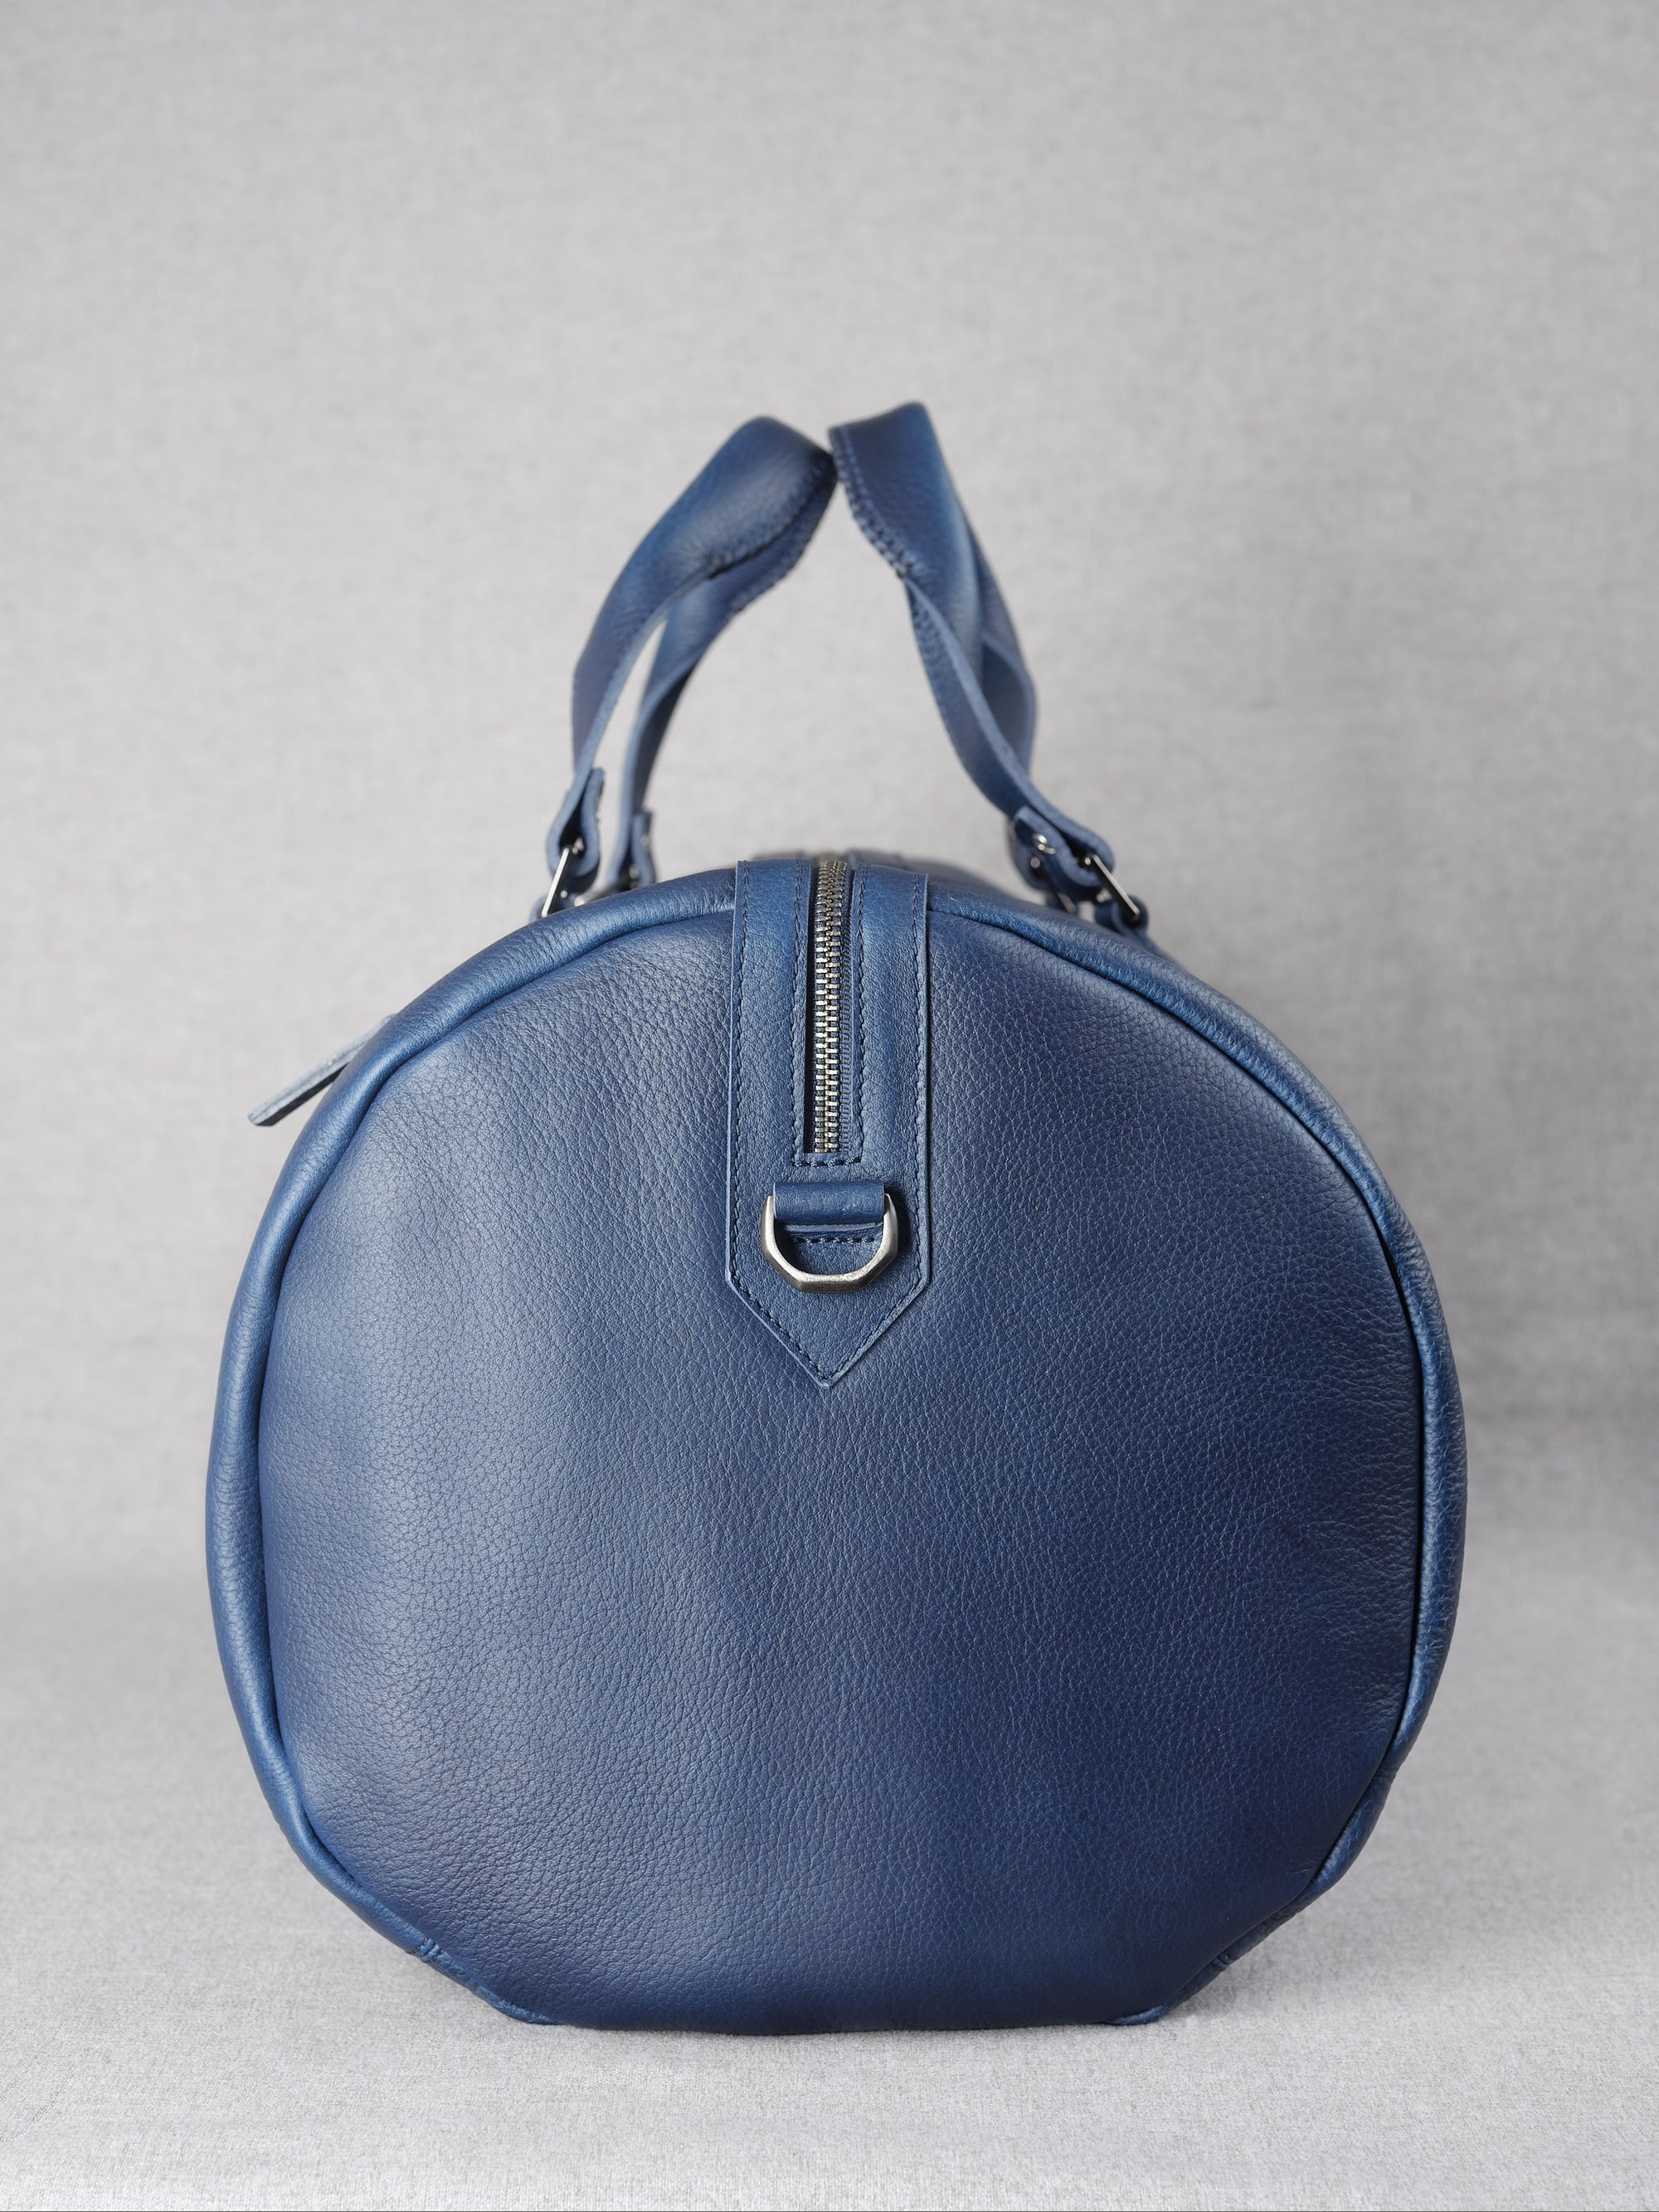 Divine proportion. Substantial Duffle Bag Navy by Capra Leather